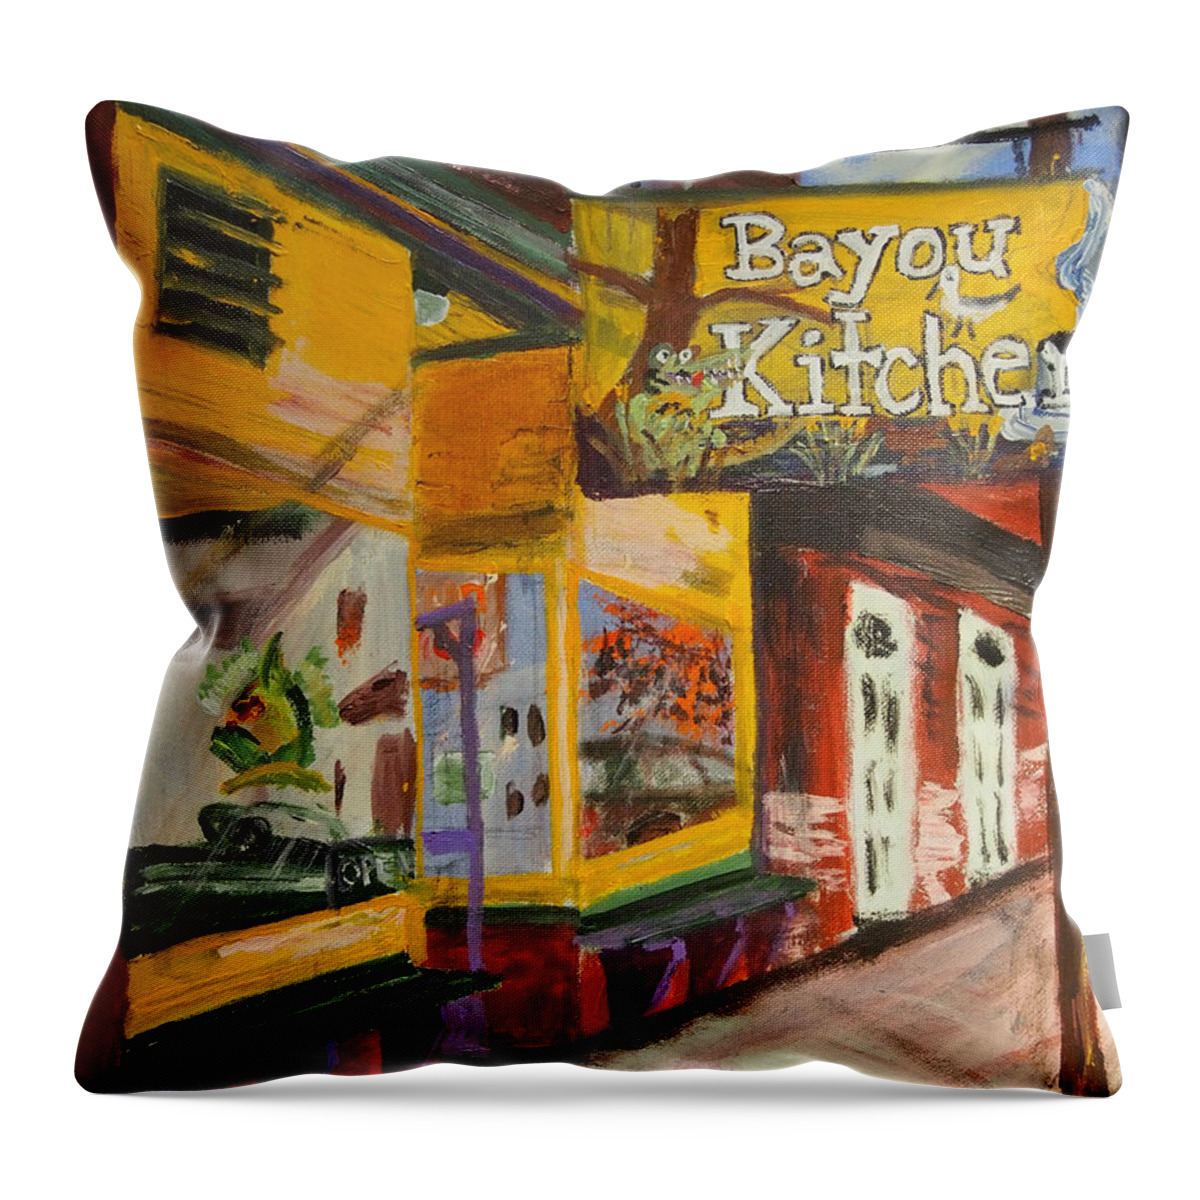 #americana #shopfronts #portland Throw Pillow featuring the painting The Bayou Kitchen by Francois Lamothe